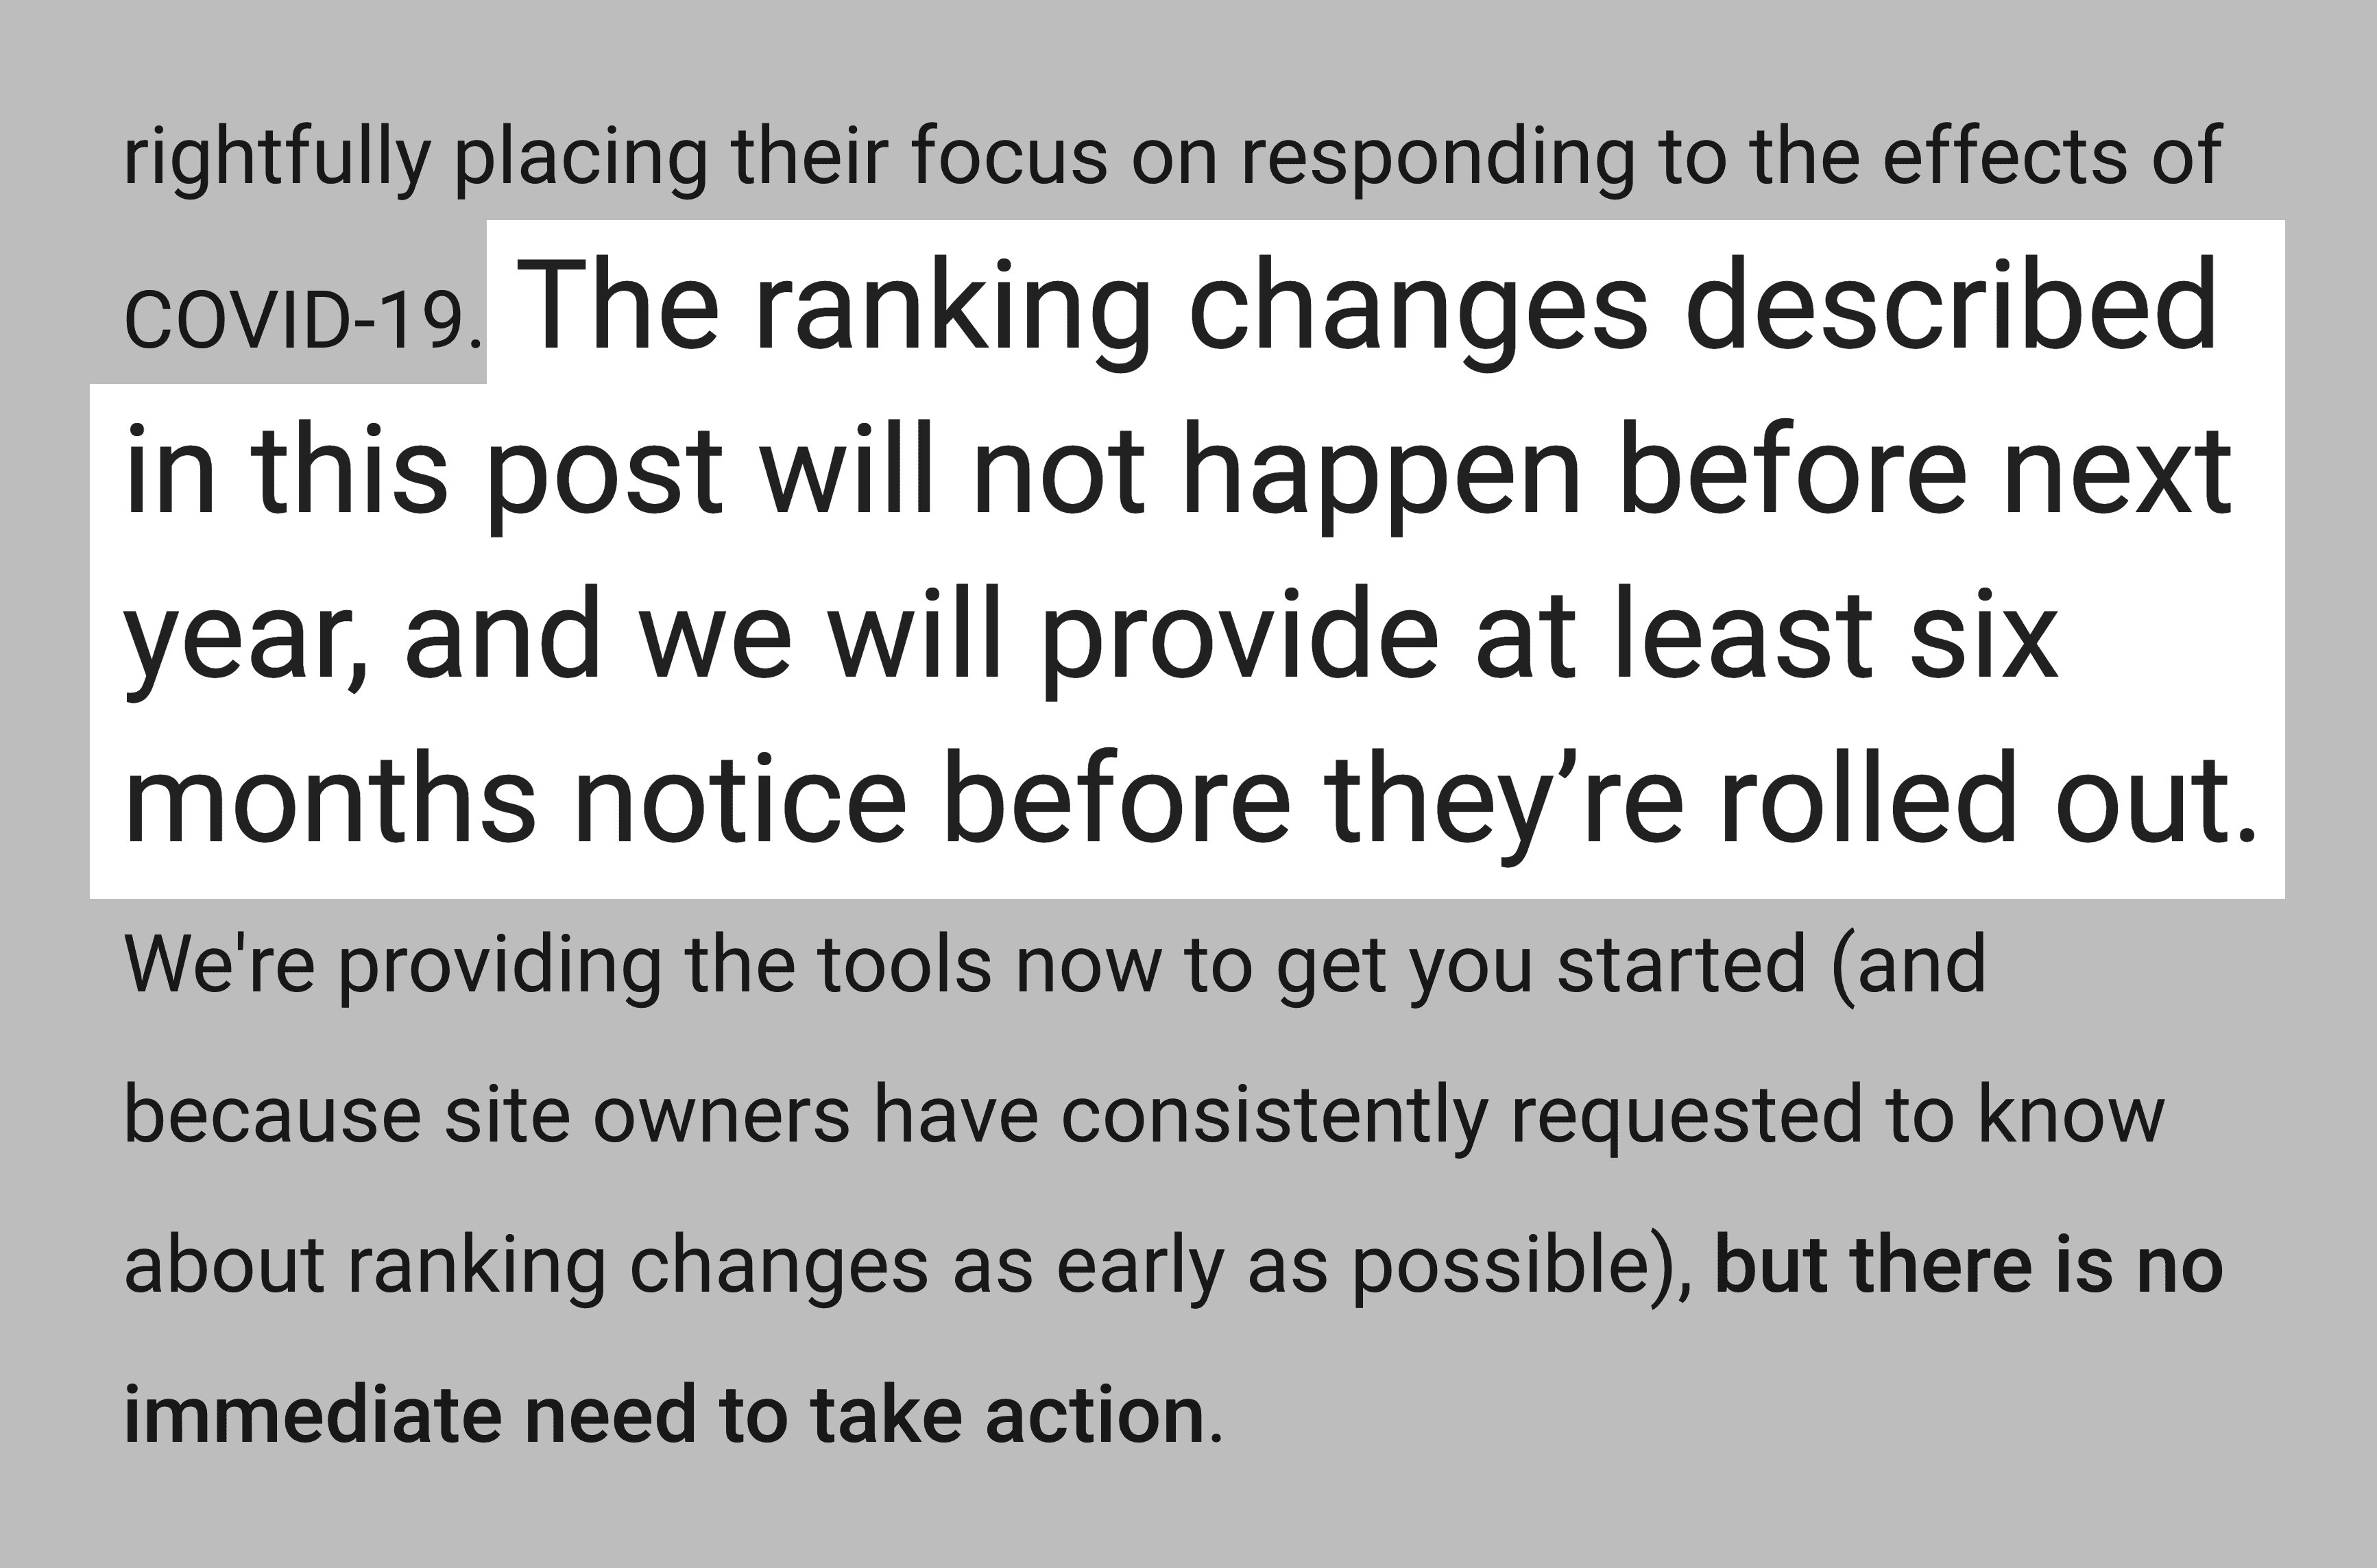 Google on ranking changes next year